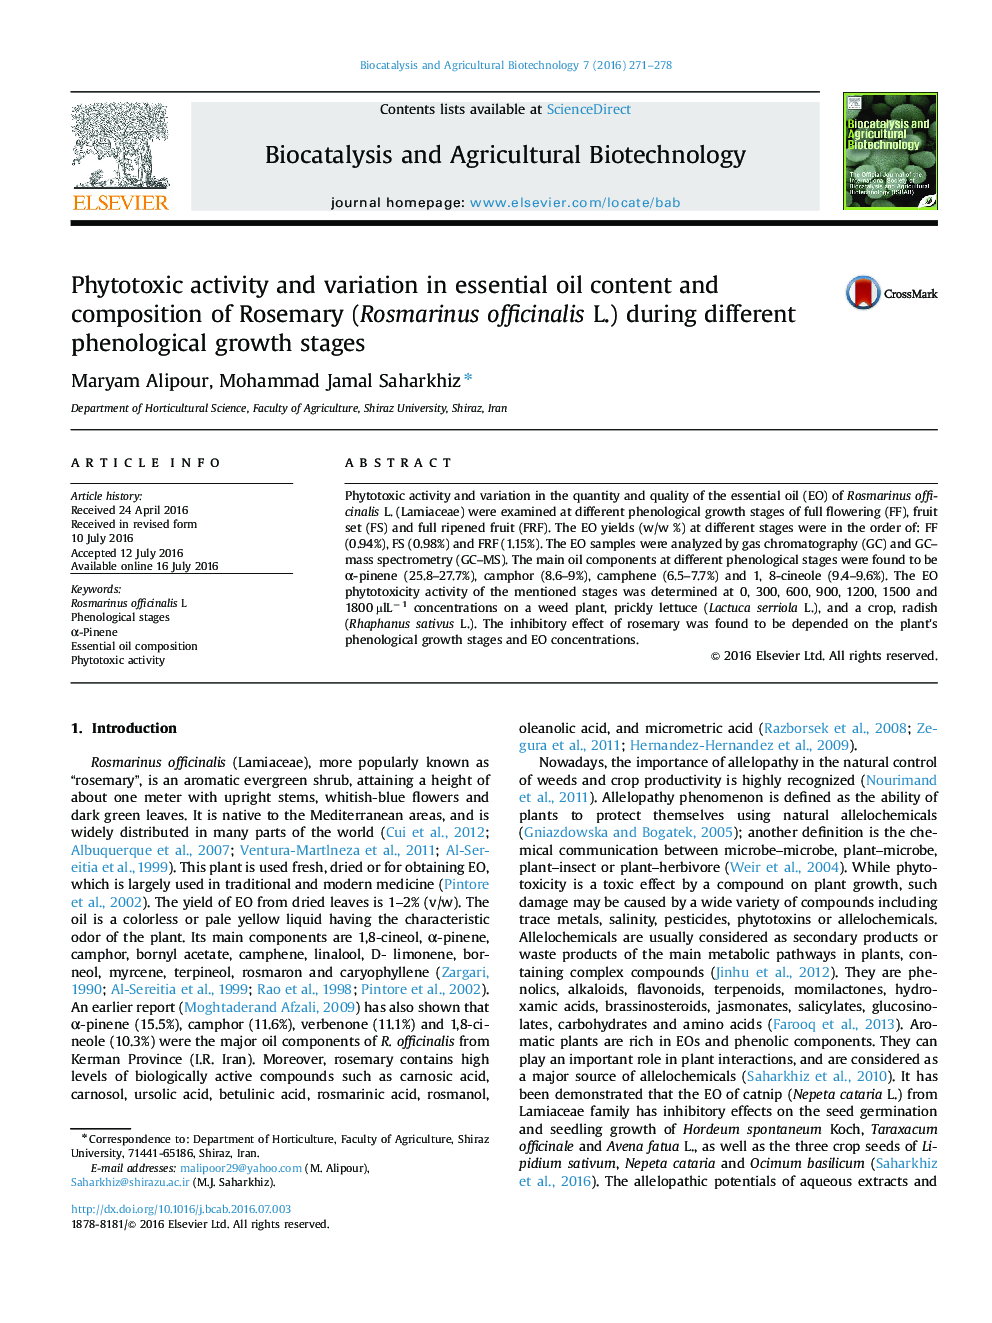 Phytotoxic activity and variation in essential oil content and composition of Rosemary (Rosmarinus officinalis L.) during different phenological growth stages